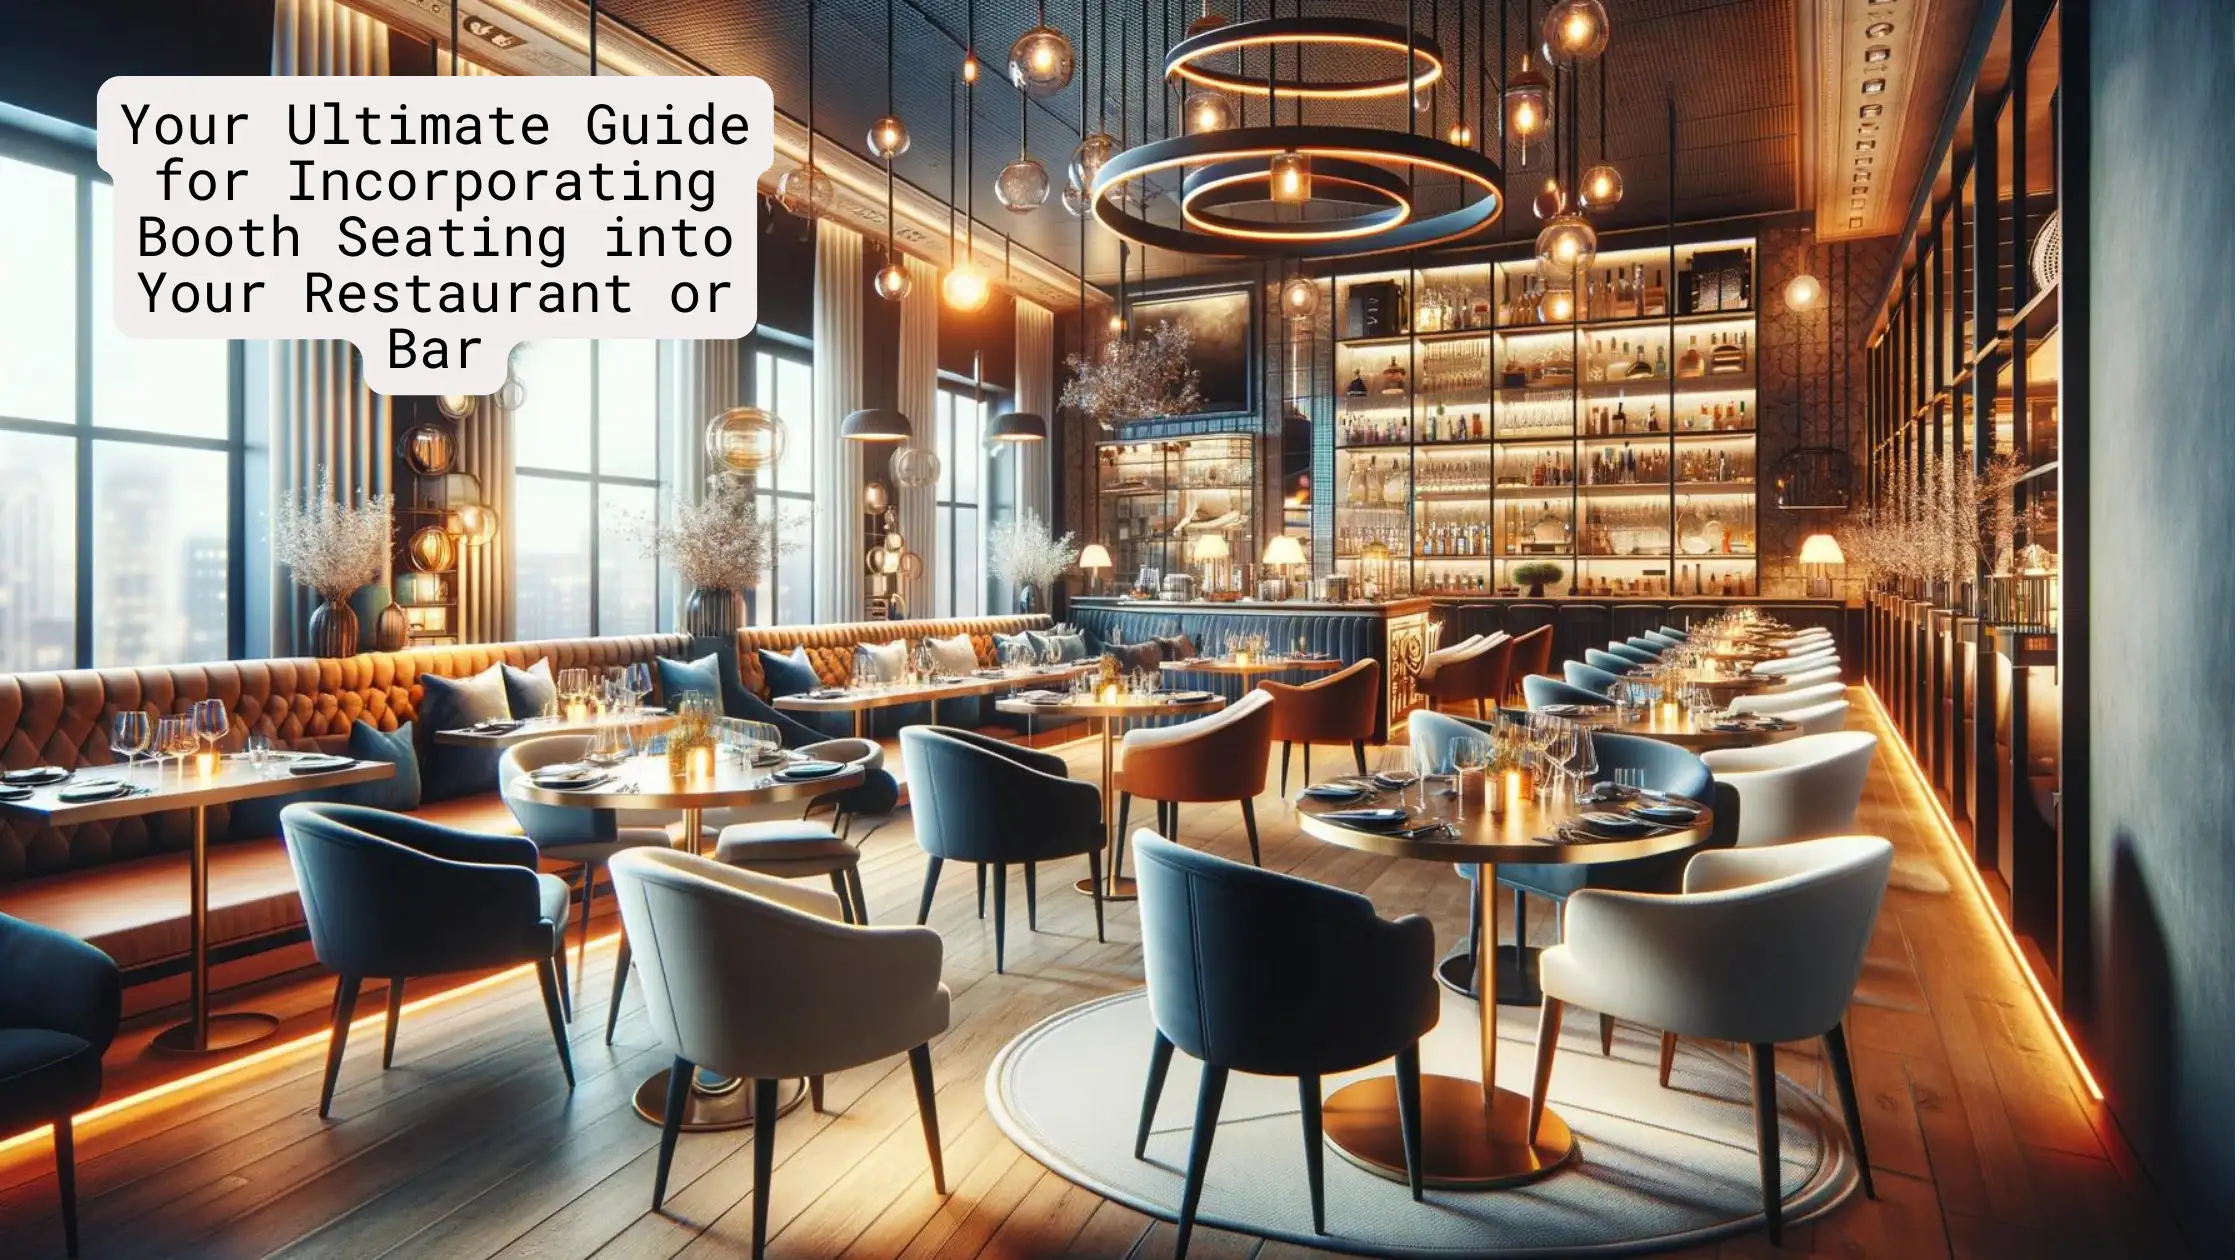 SUREN SPACE BANNER-Your Ultimate Guide for Incorporating Booth Seating into Your Restaurant or Bar